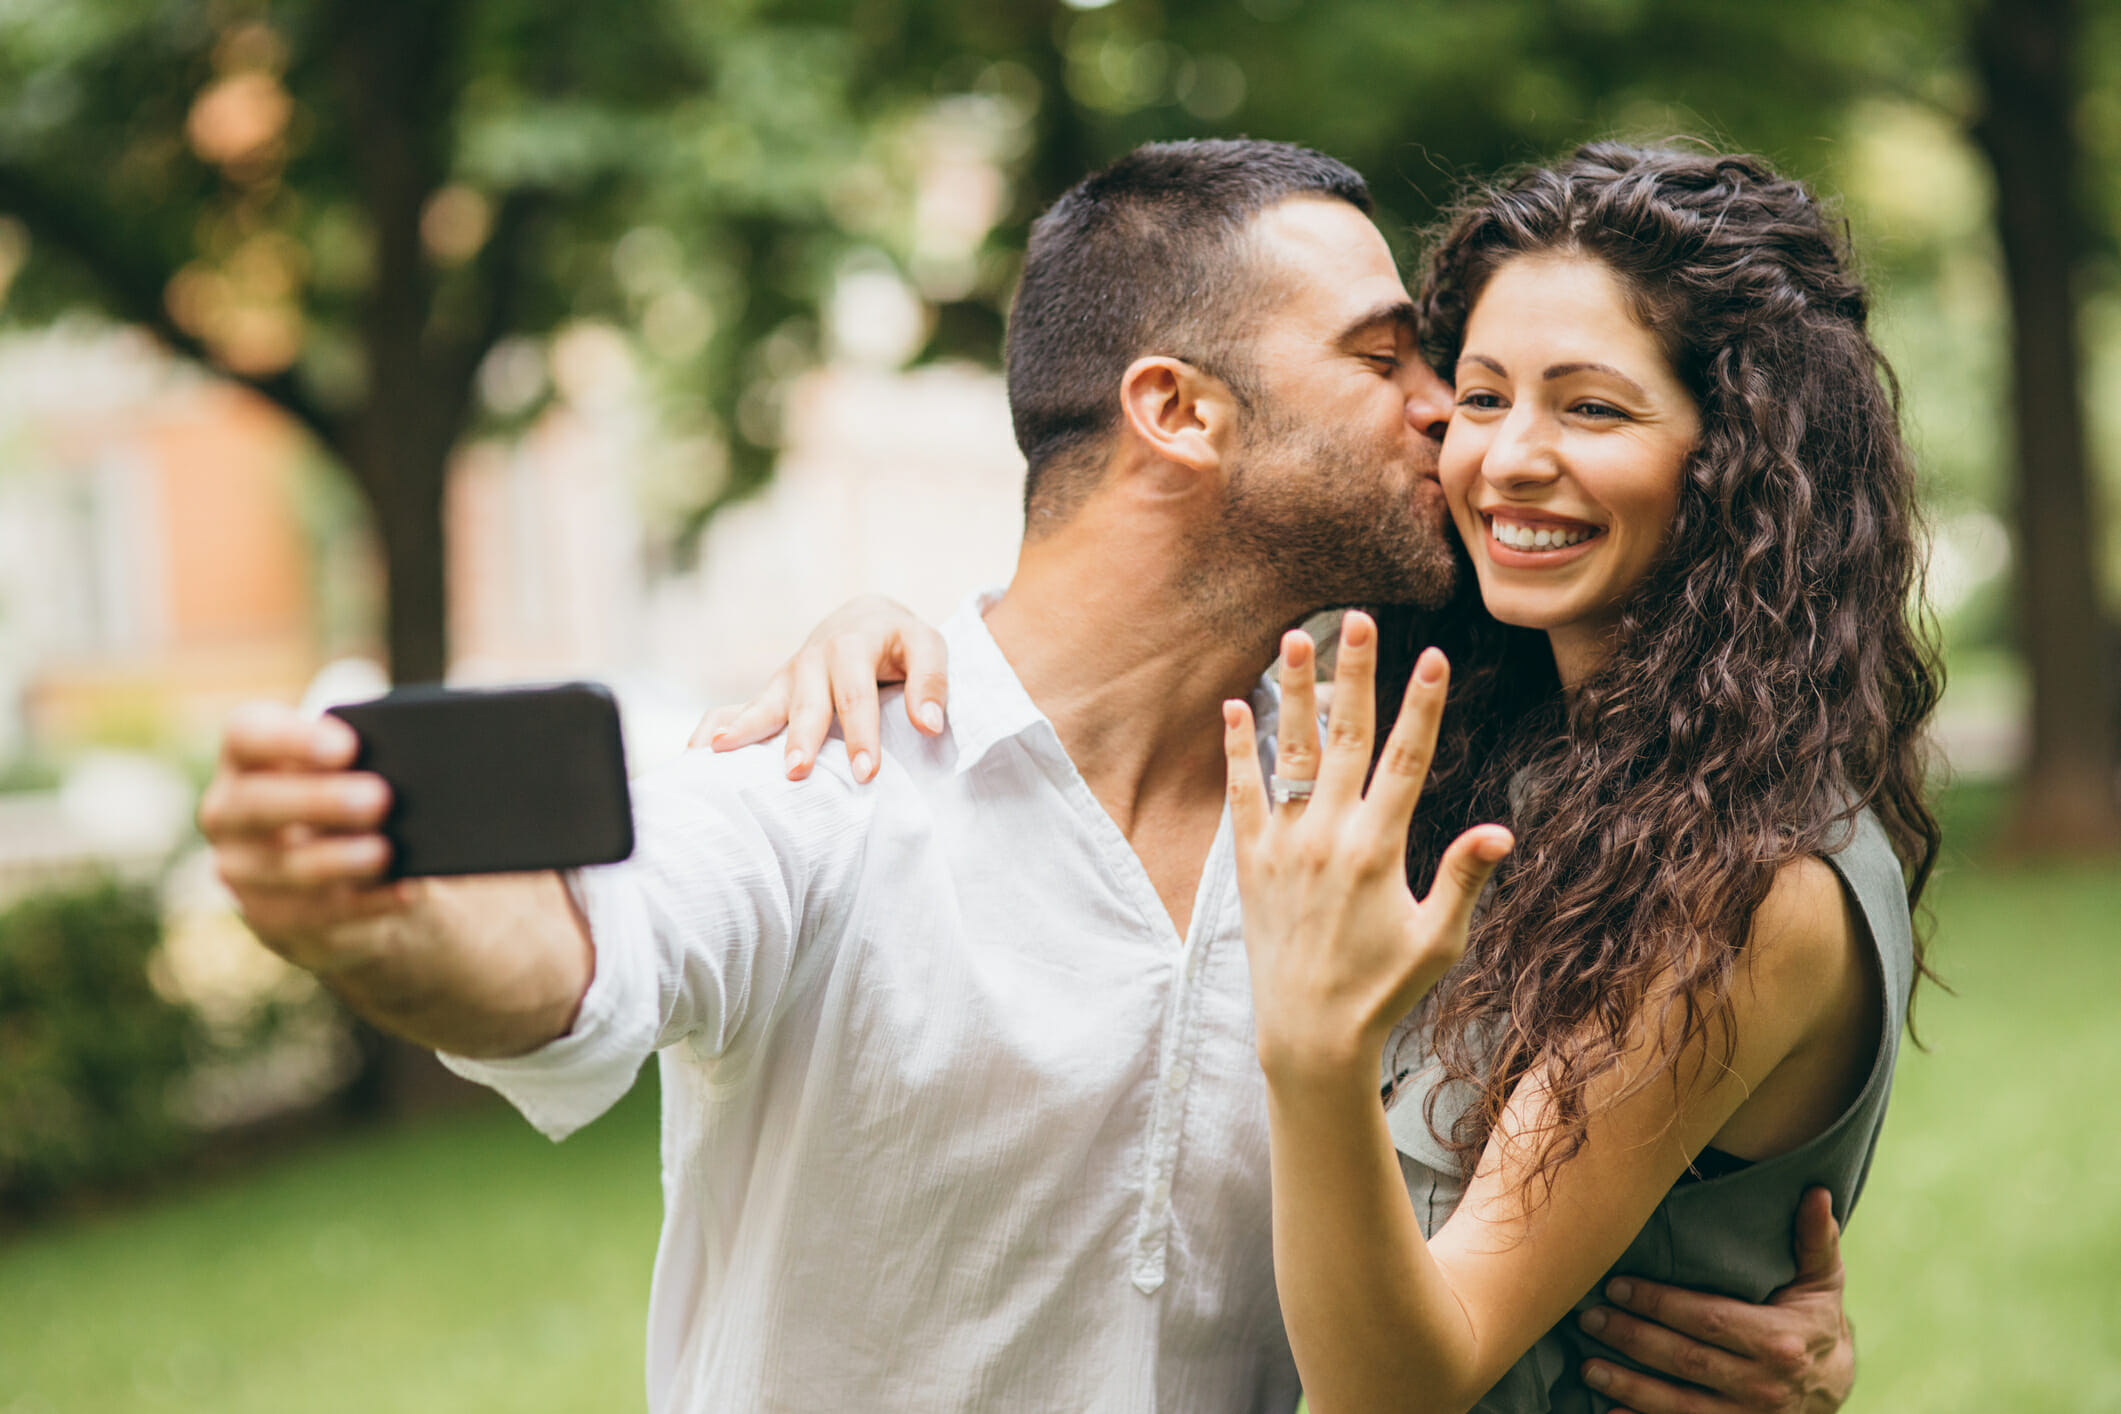 A happy couple poses for a selfie after getting engaged.